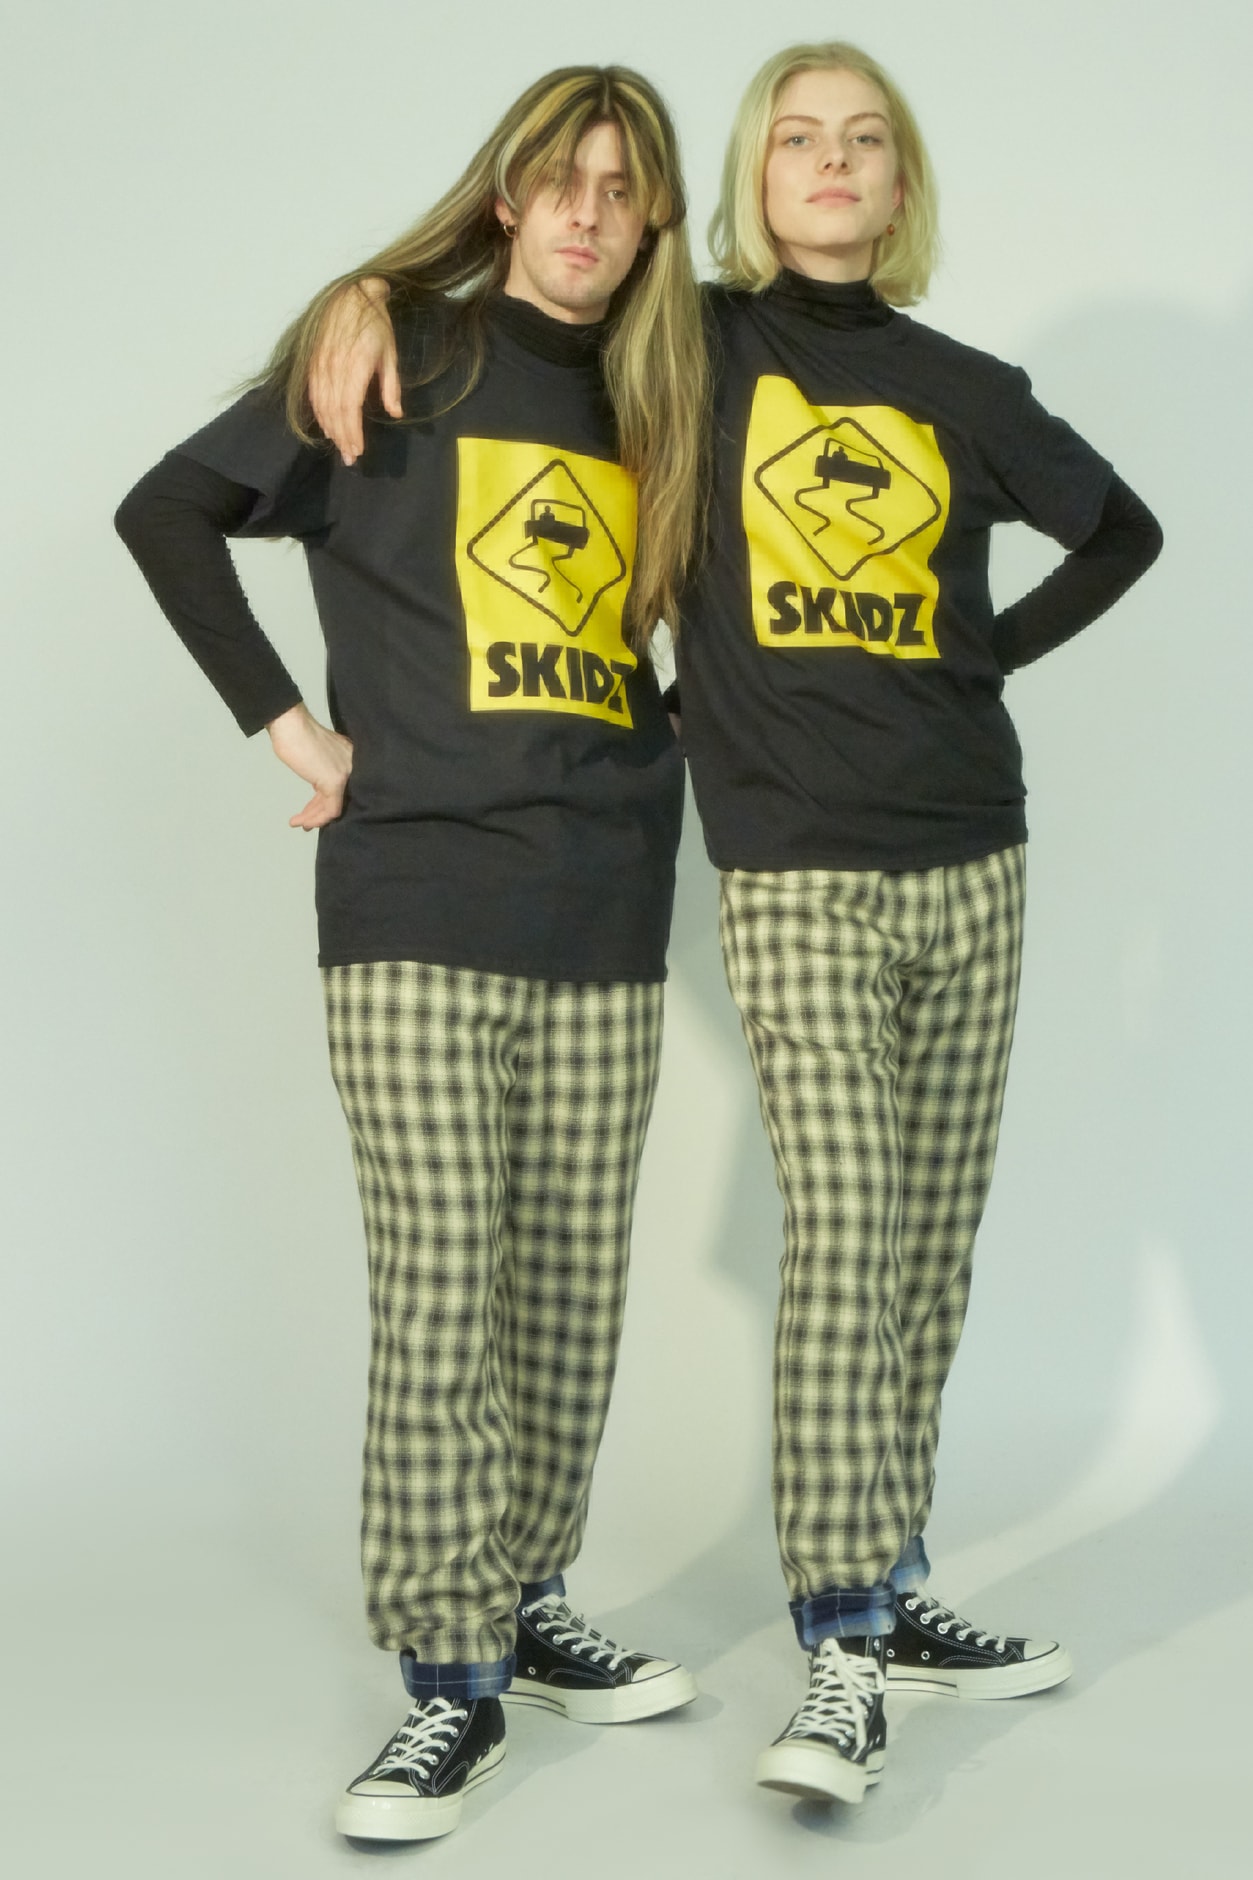 Opening Ceremony Skidz Capsule Collection Logo T-shirts Black Yellow Plaid Pants Tan Navy